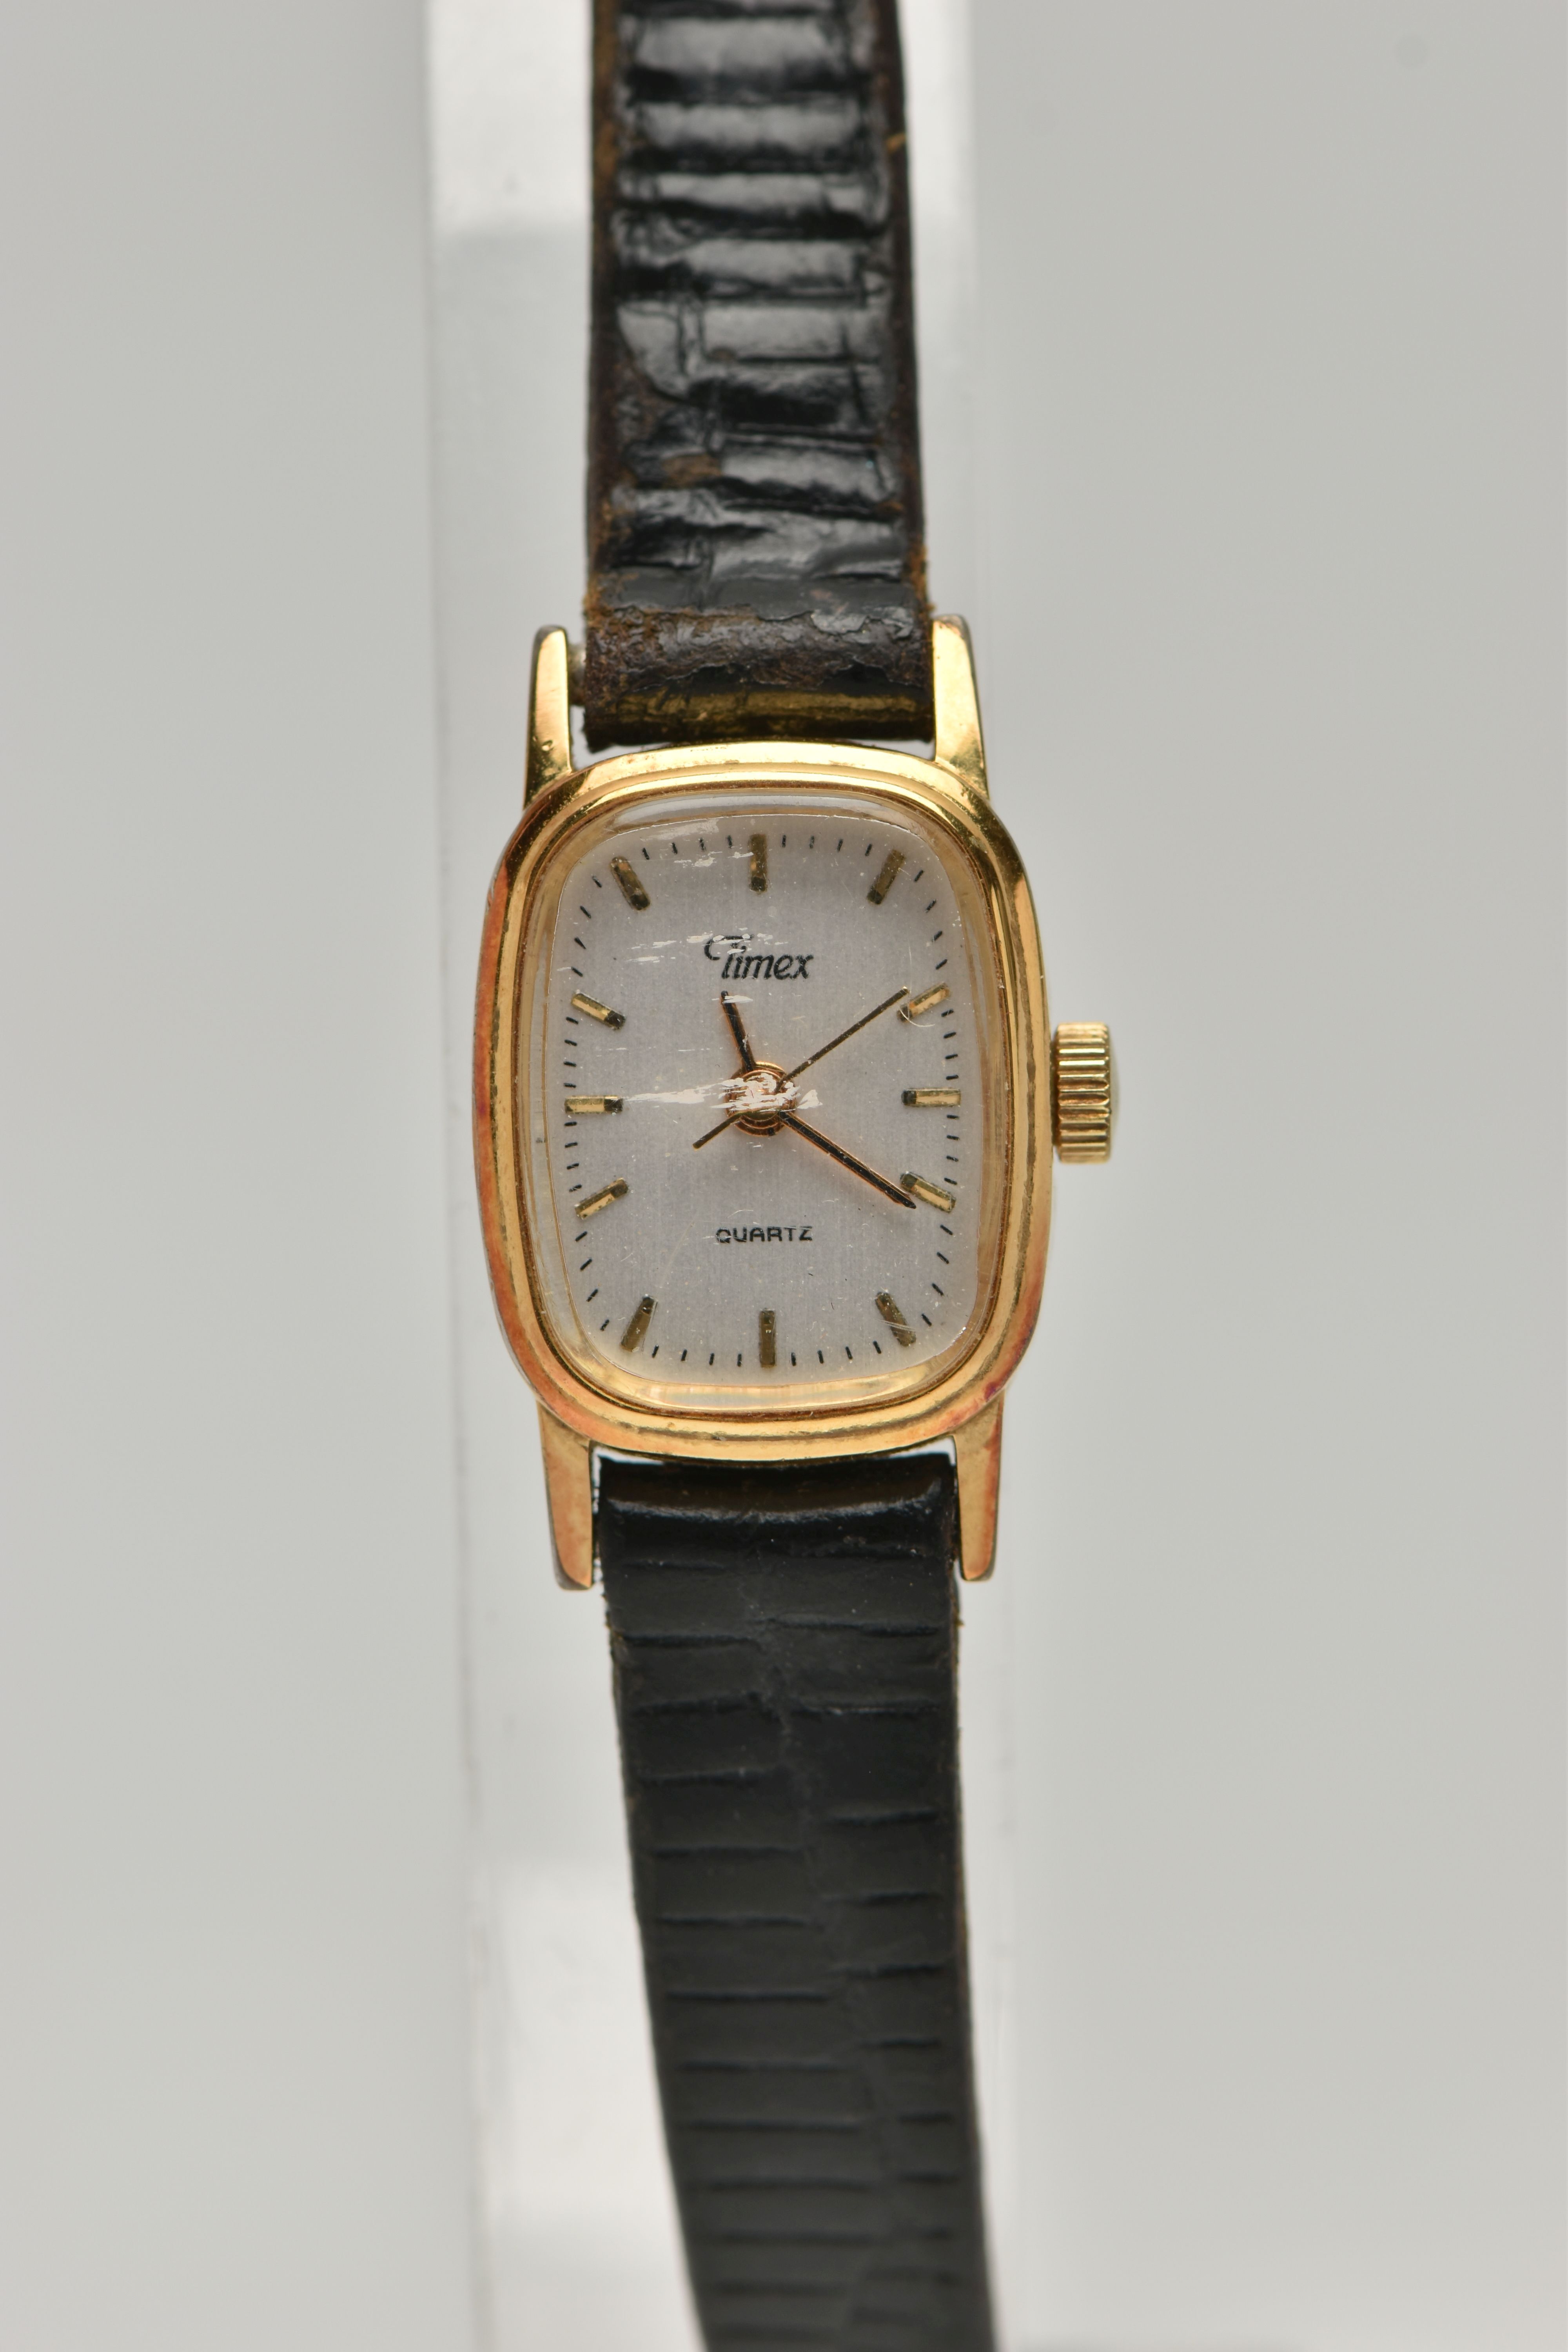 A LADYS 'LONGINES' WRISTWATCH AND A TIMEX WATCH, quartz Longines, round gold dial signed 'Longines', - Image 5 of 8